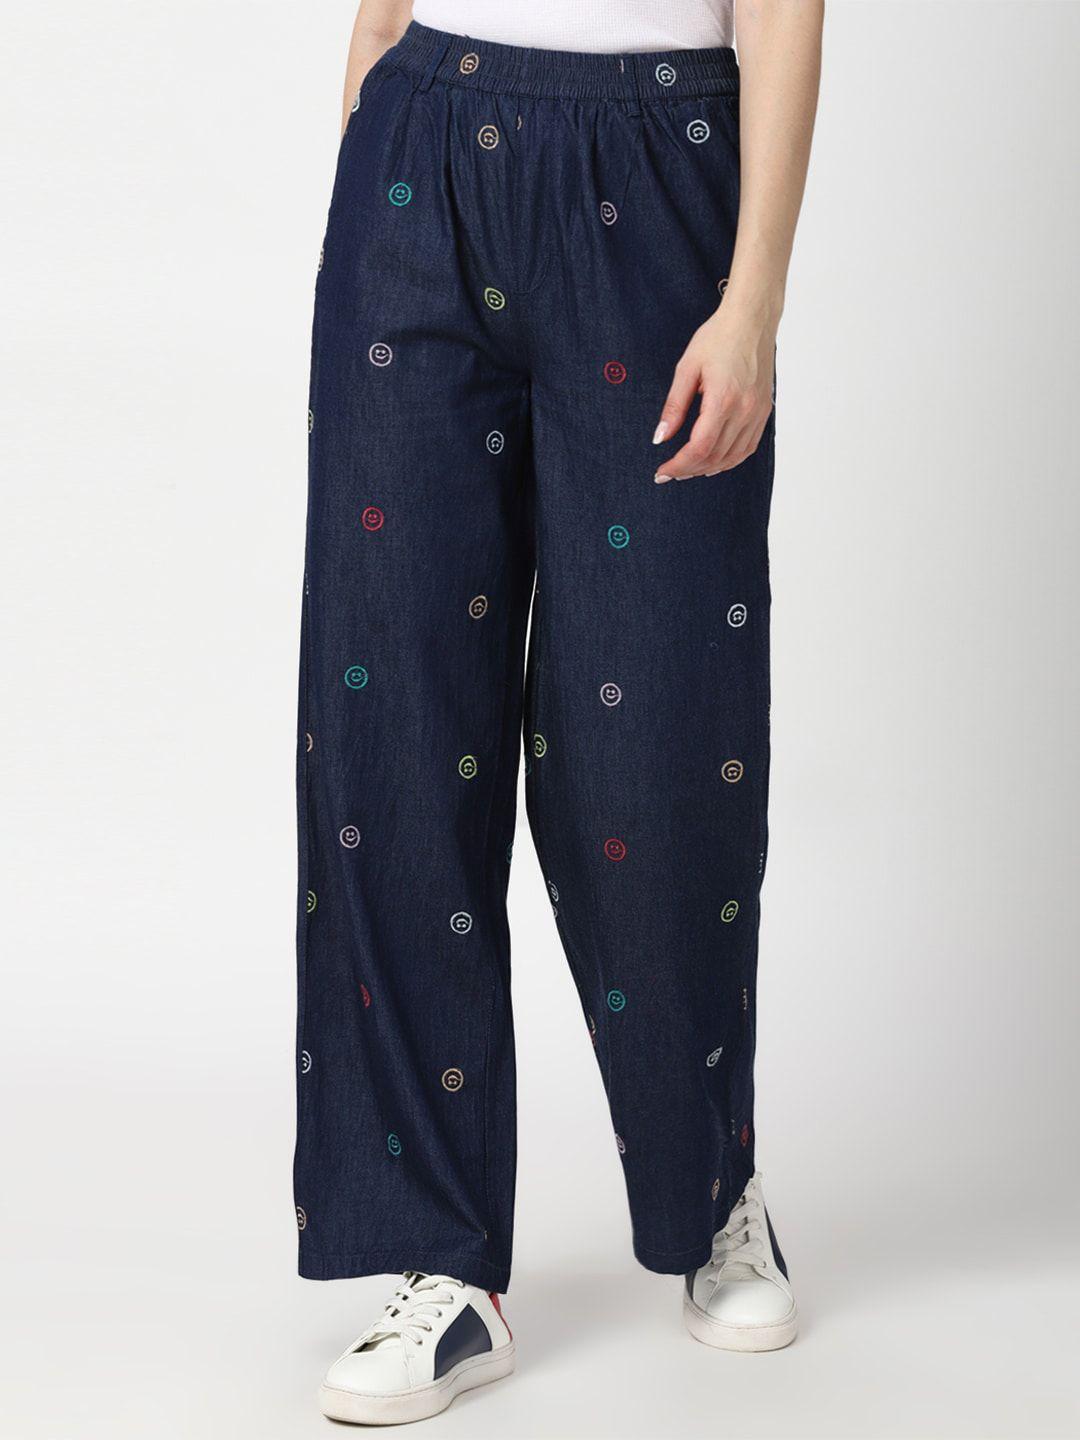 FOREVER 21 Women Navy Blue Printed Trousers